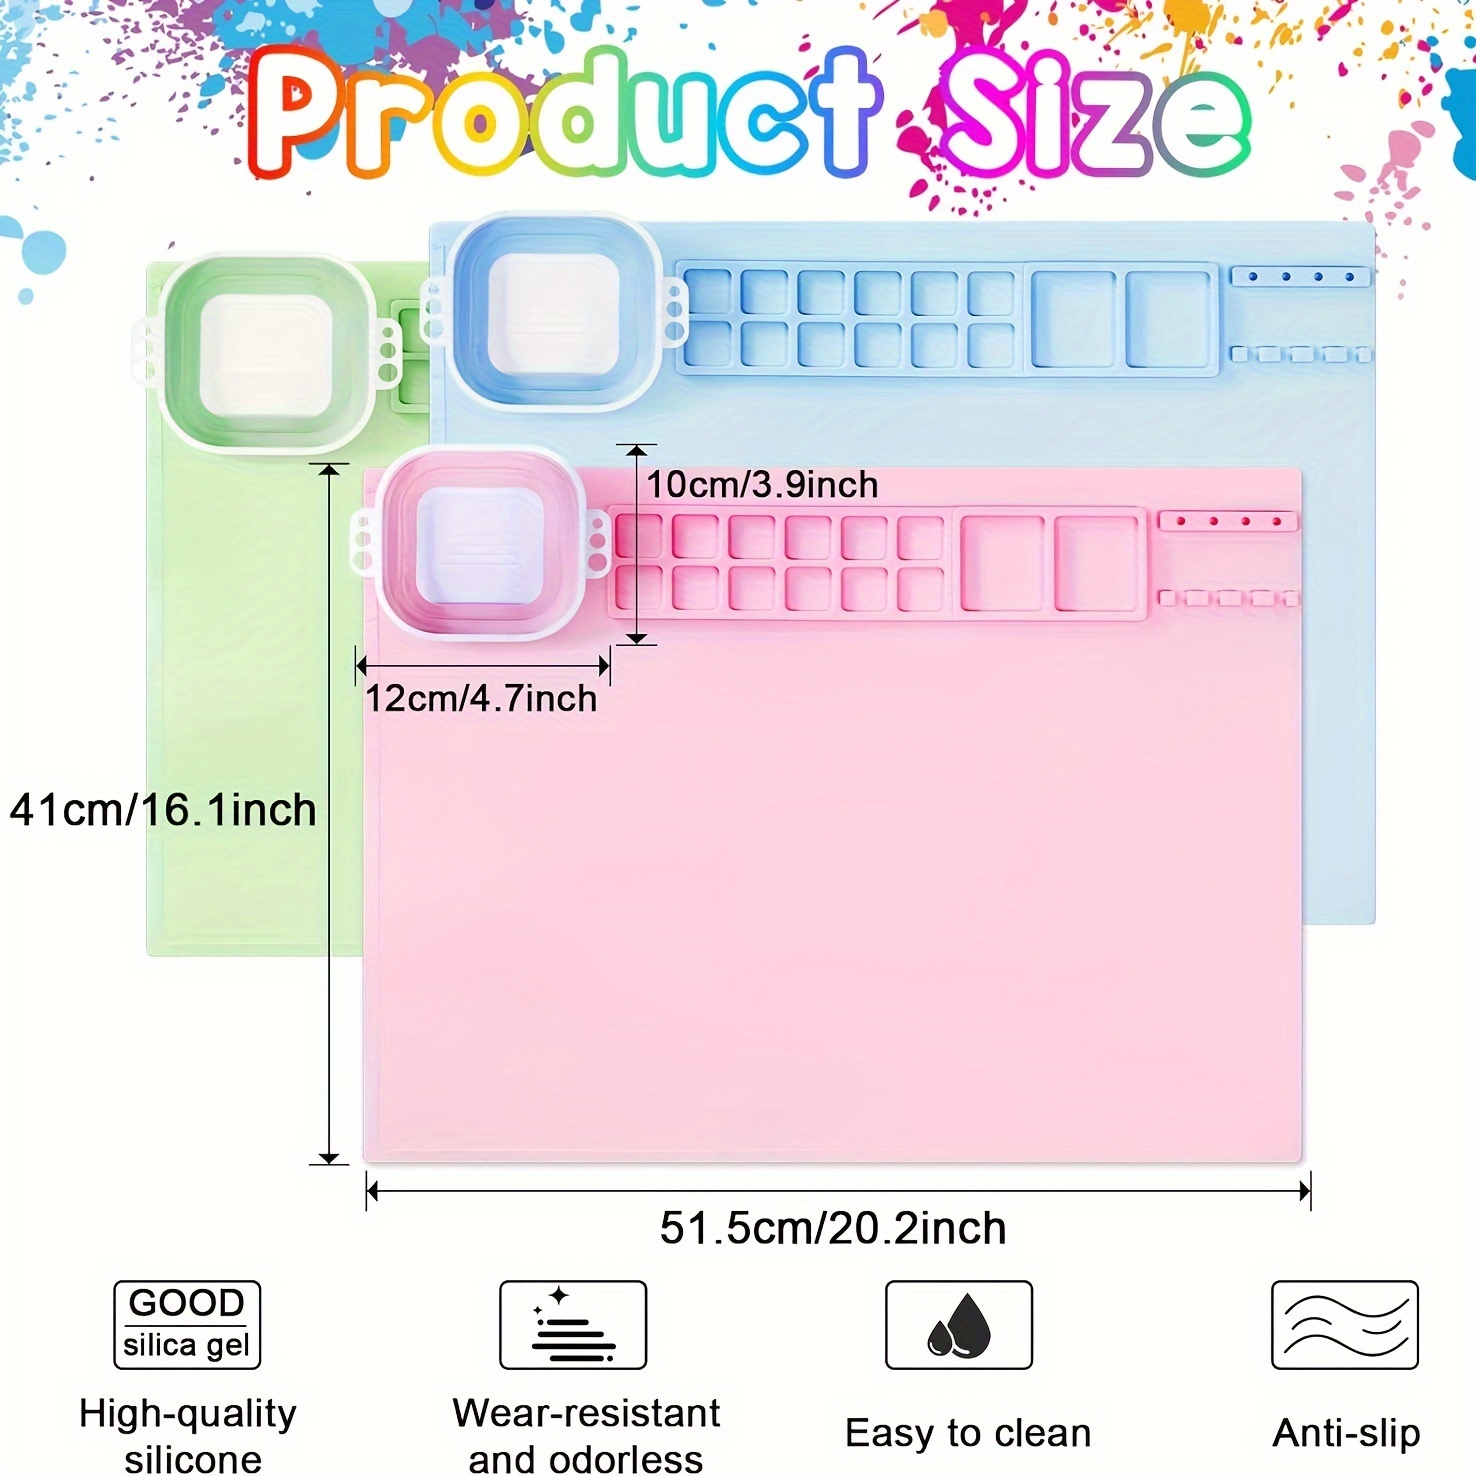 Pradory Silicone Art Mat,20x16 Large Silicone Crafting Mat for Kids,Non-Stick  Silicone Artist Mat with Water Cup/Sponge/12 Paint Dividers for Crafts, Painting,Art,Resin,Table,Clay,DIY Creations-Pink